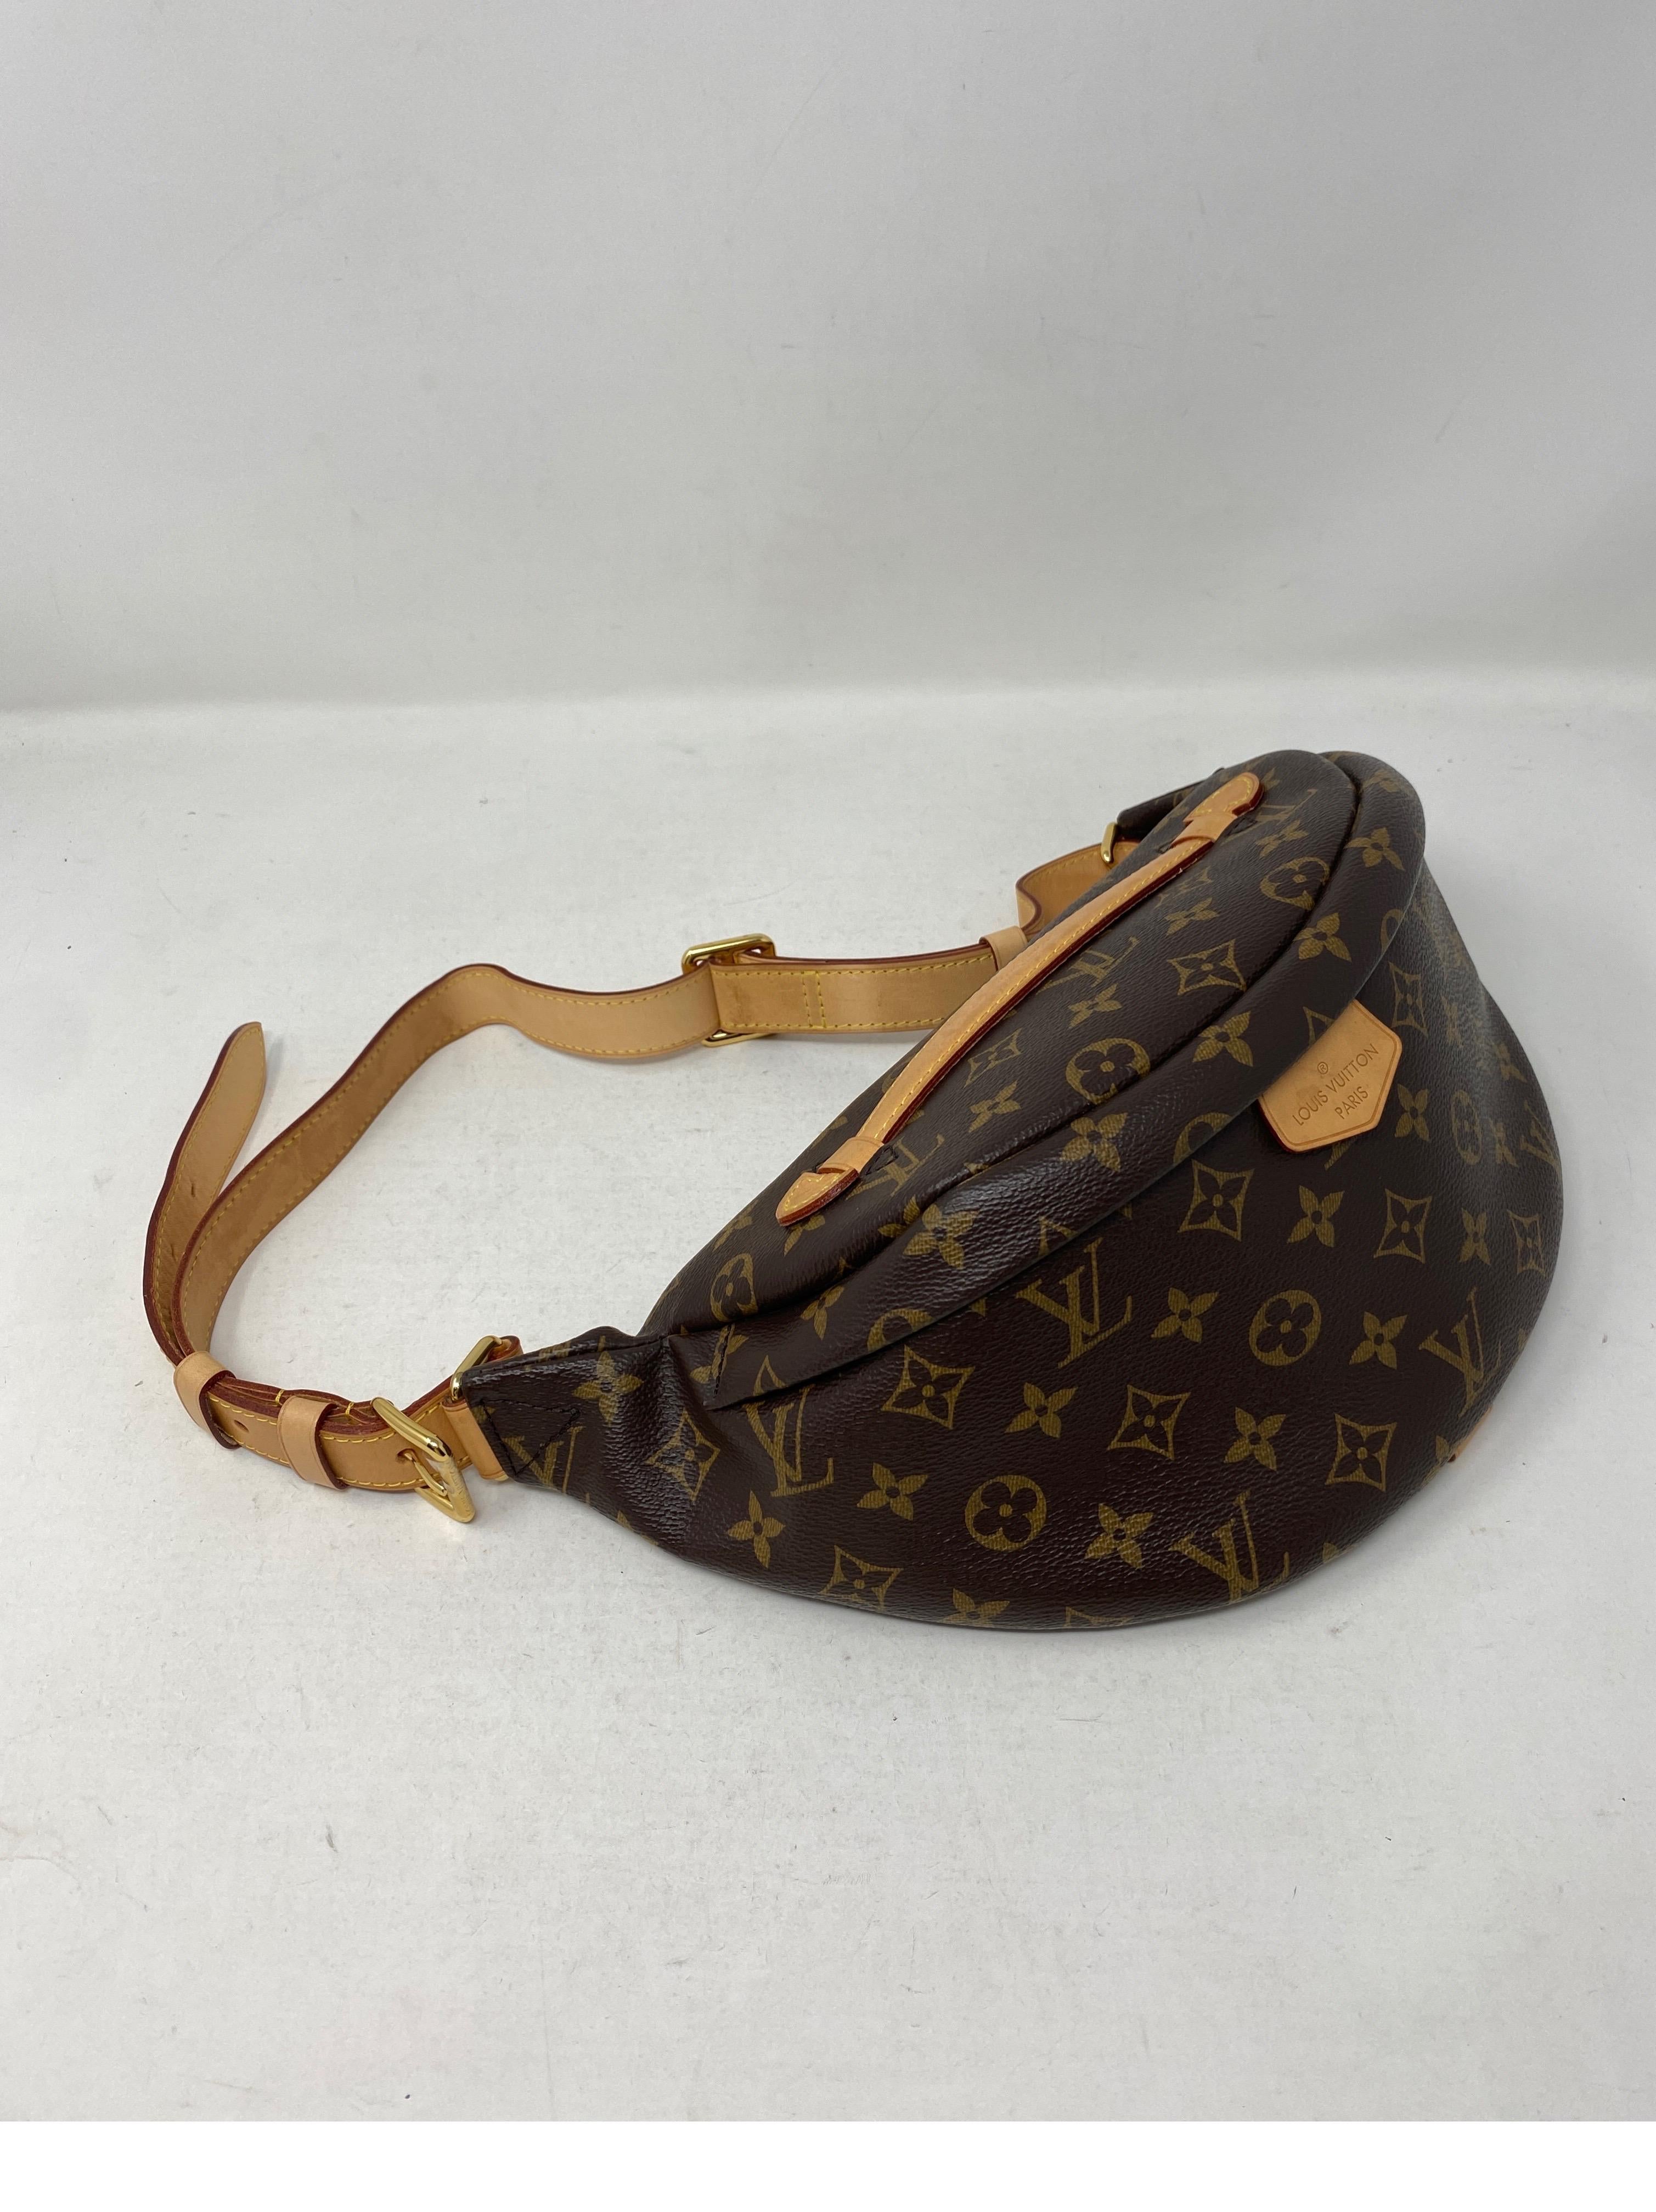 Louis Vuitton Bum Bag. Monogram coated canvas. Good condition. Interior clean. Hard to find belt bag. Retired from LV. Can be worn crossbody too. Guaranteed authentic. 